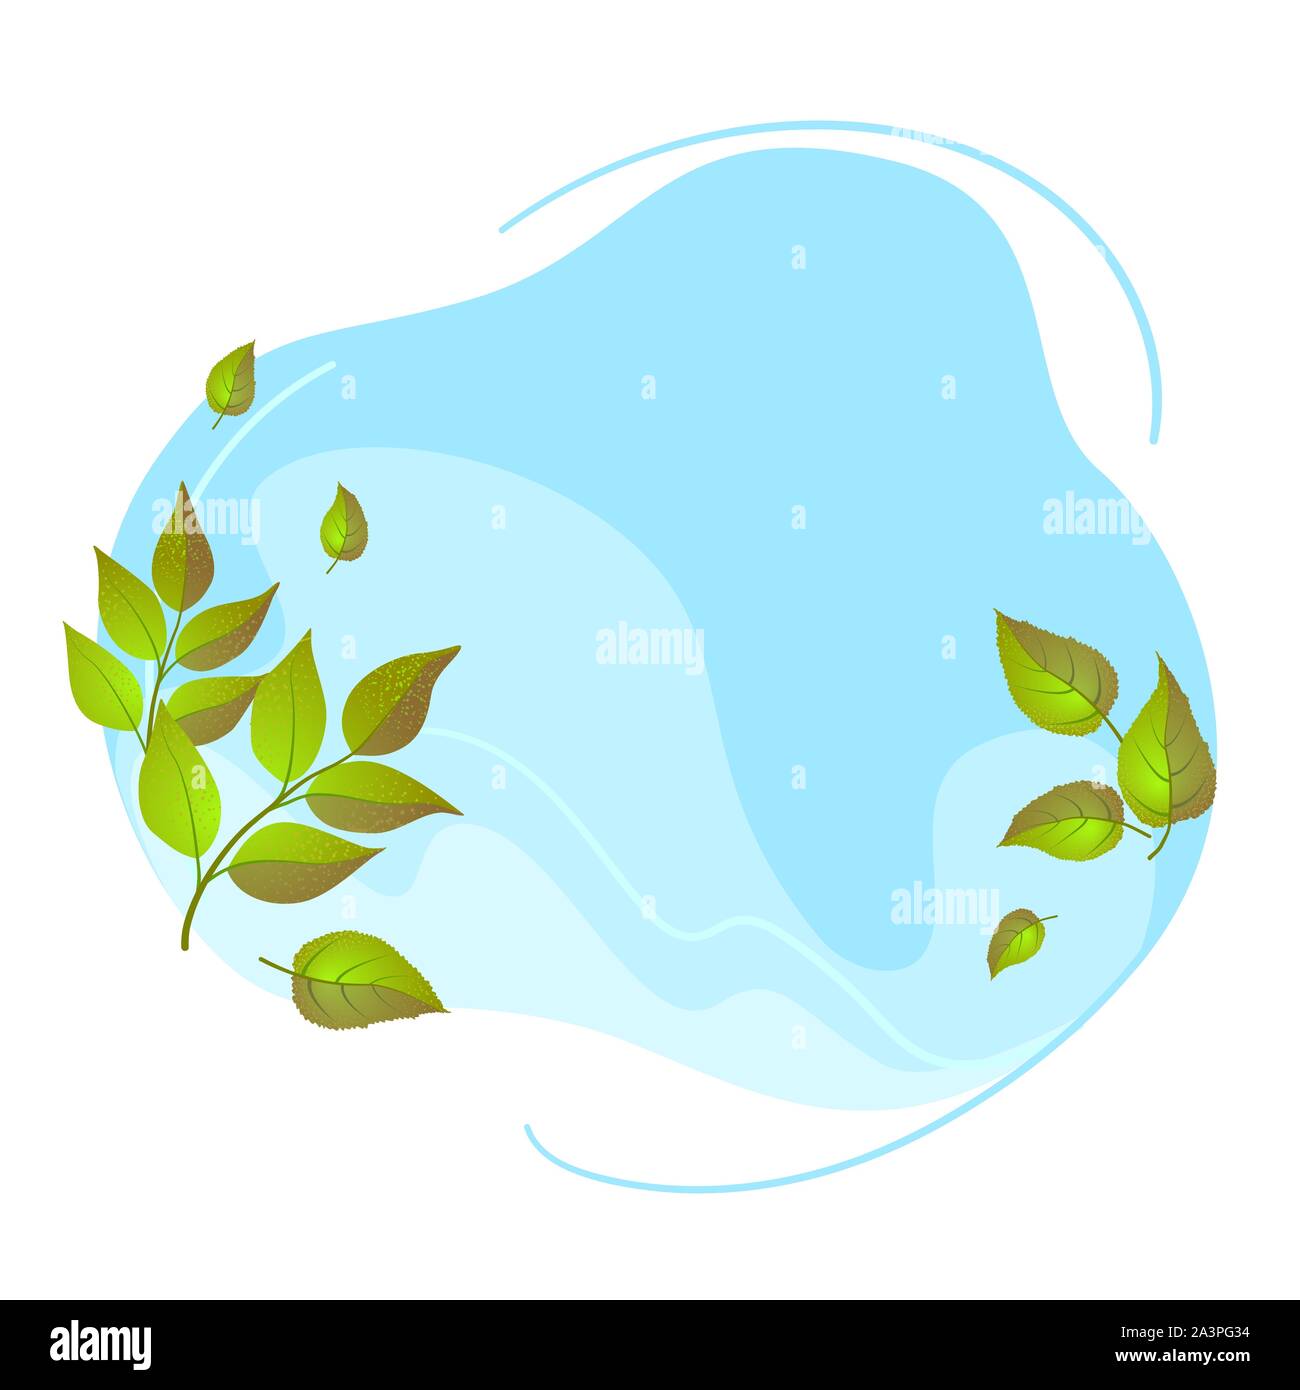 Liquid sky with green leaves concept. Copy space Season Outdoor abstract vector illustration. Spring nature background round shape. Organic design template in flat style on isolated white backdrop. Stock Vector